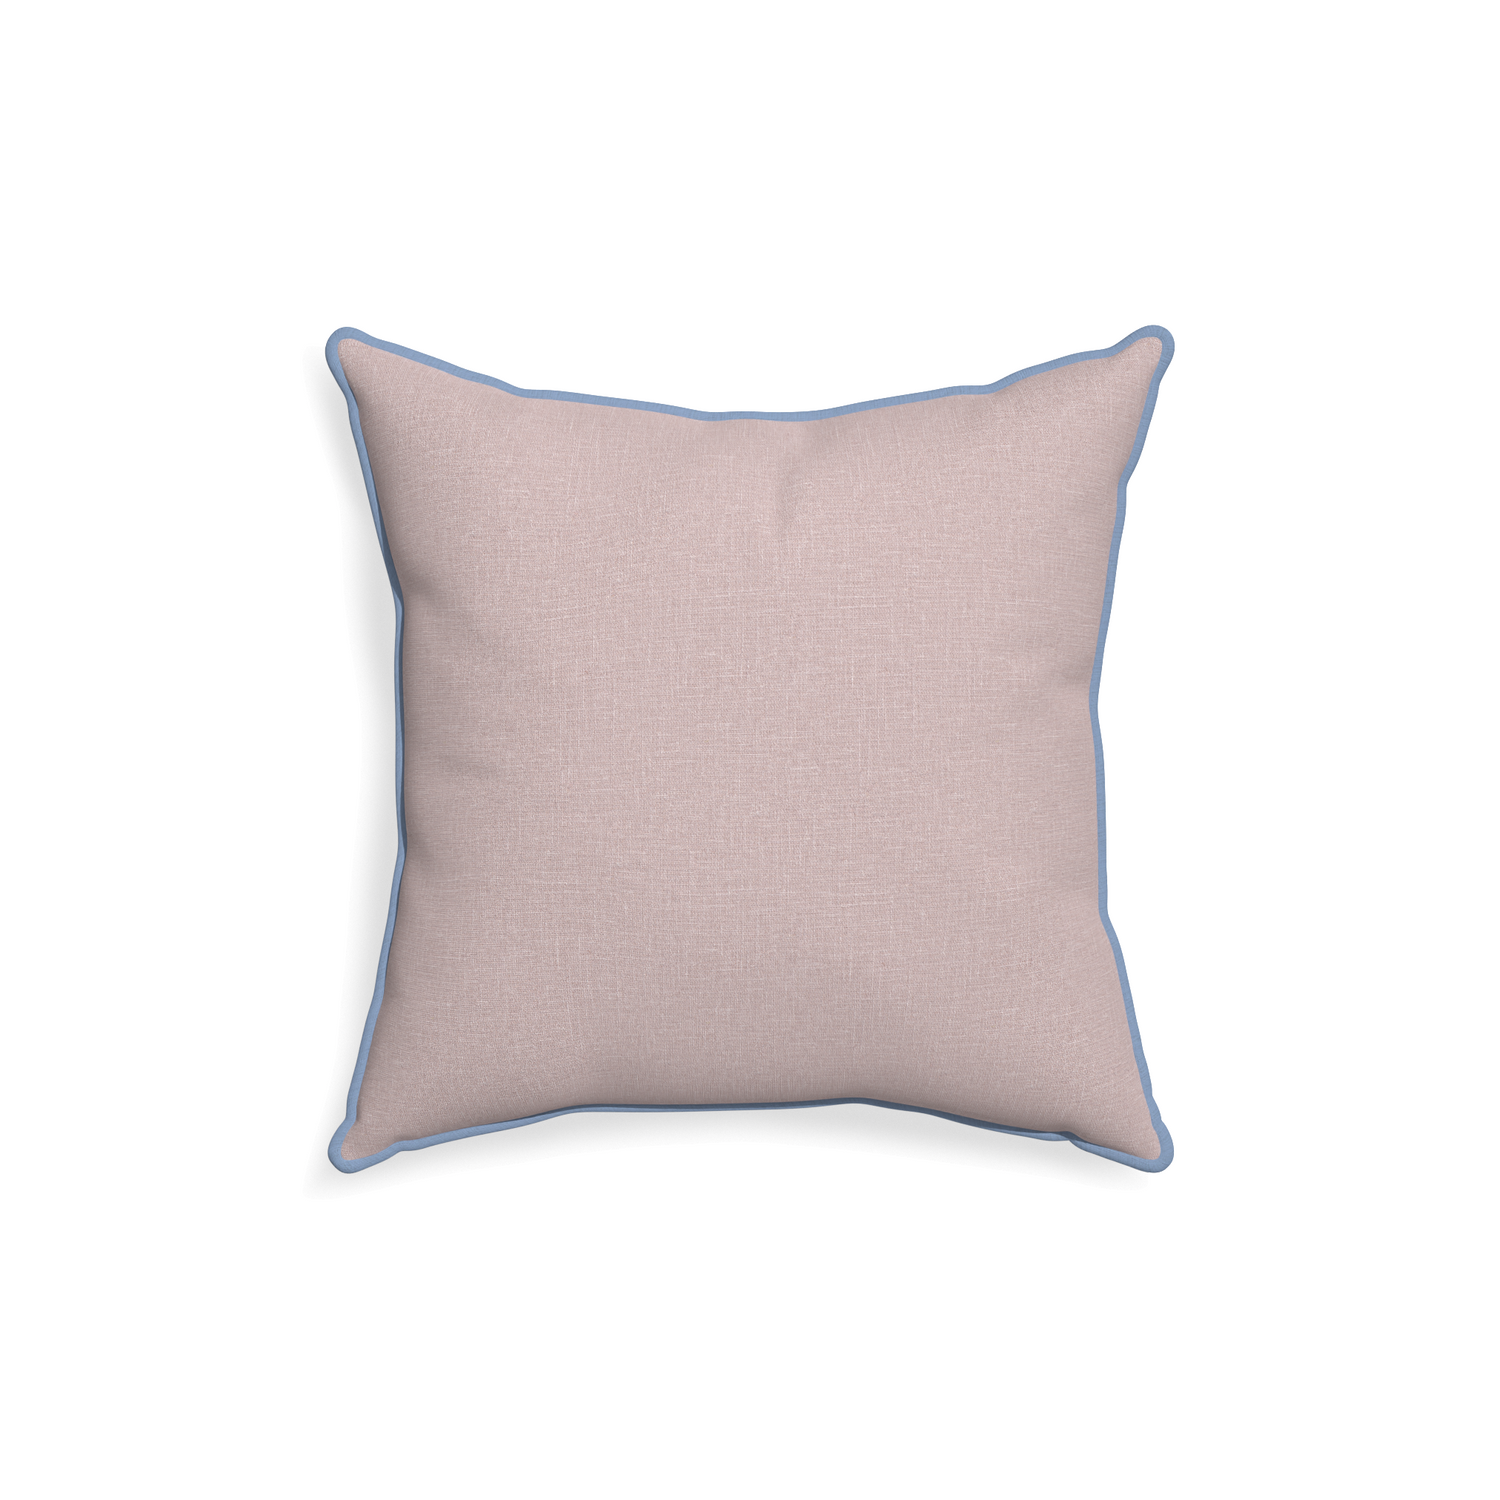 18-square orchid custom mauve pinkpillow with sky piping on white background